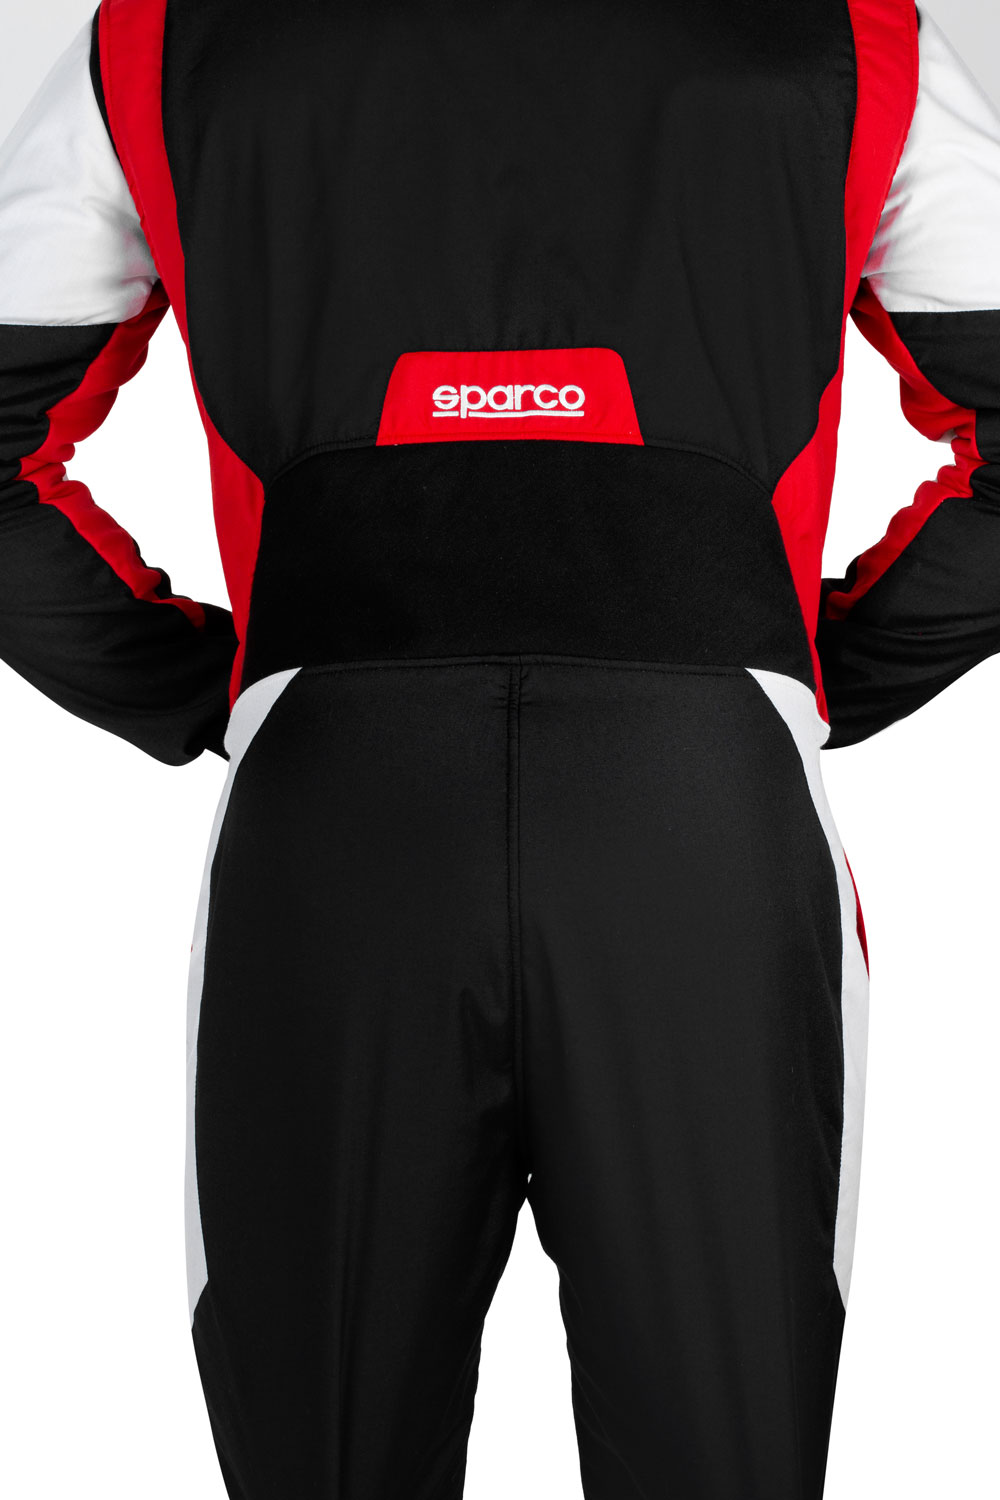 Sparco Rennoverall Competition Pro, schwarz/rot